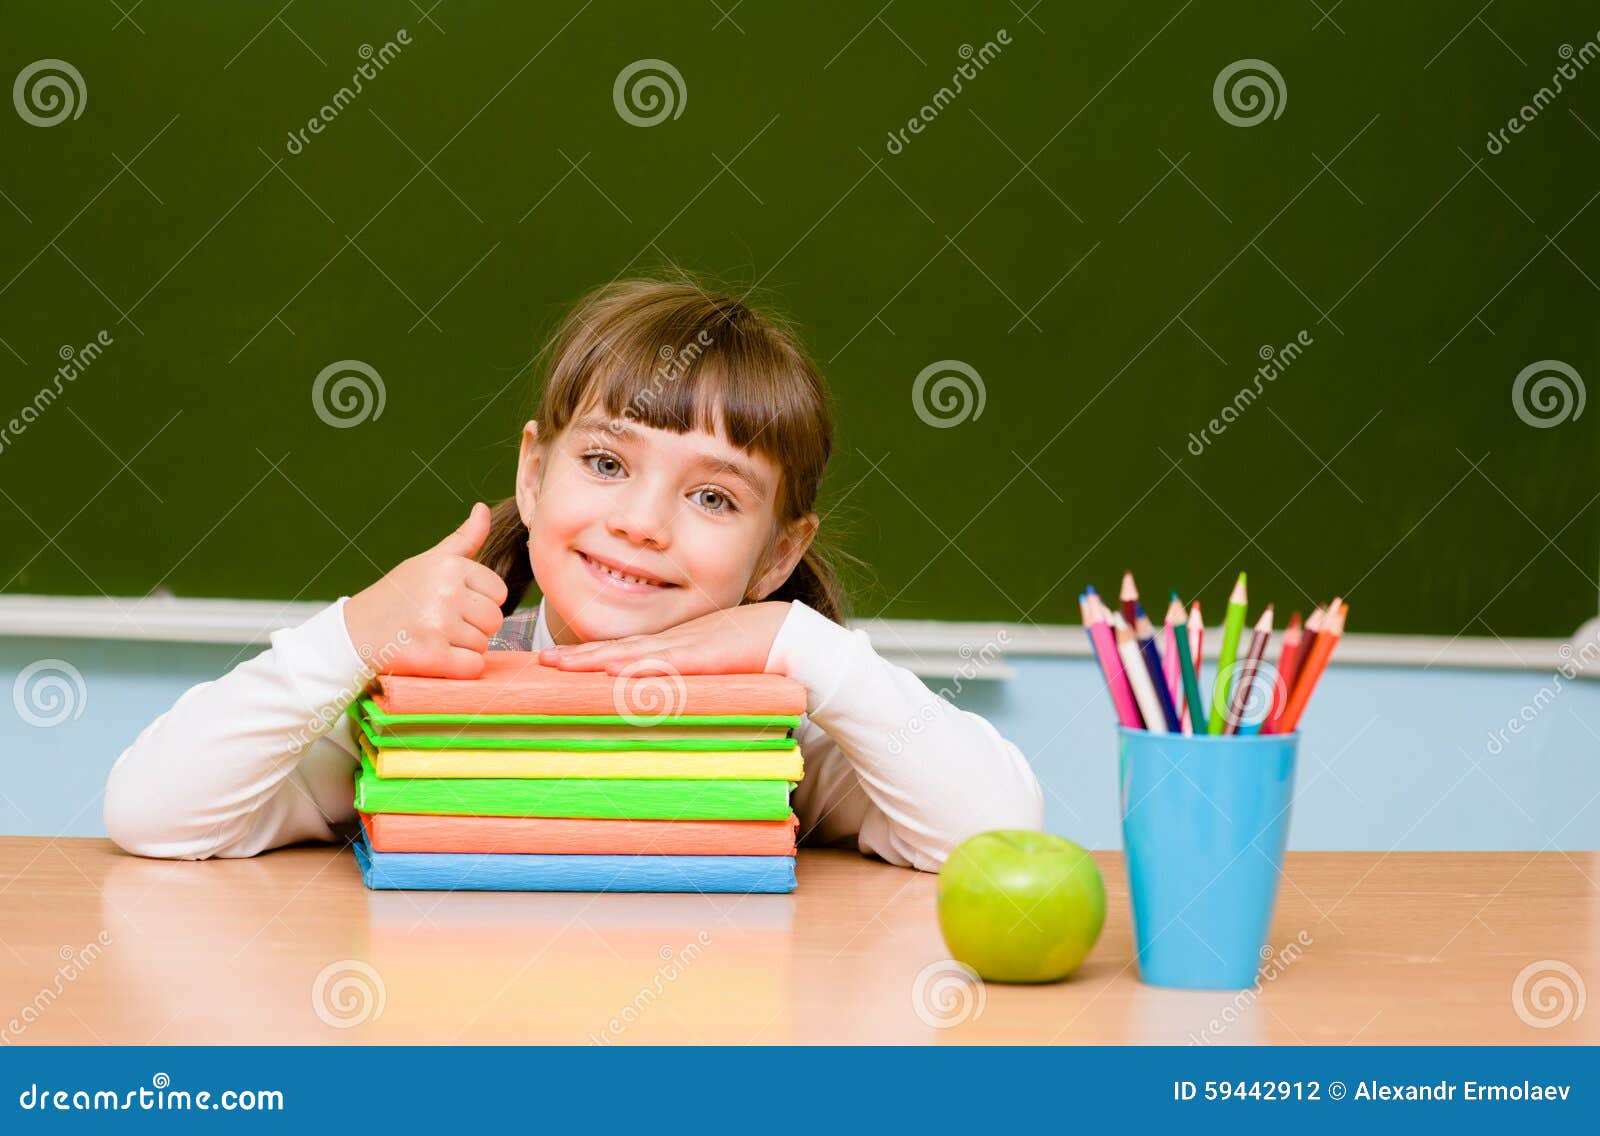 little girl showing thums up on the background of chalkboard